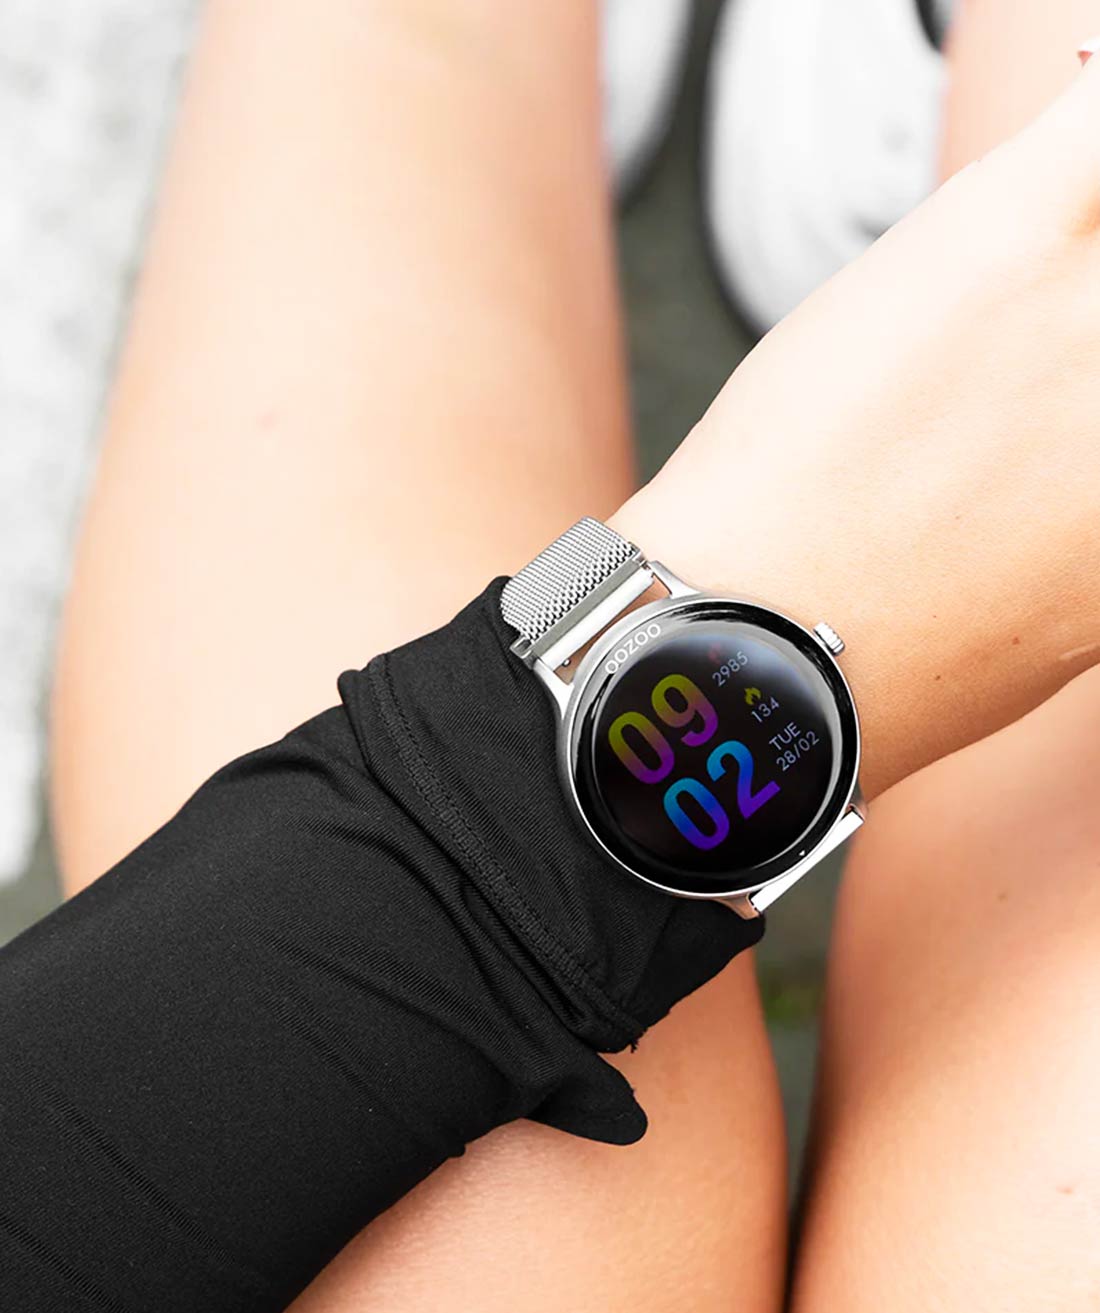 View Oozoo smartwatches